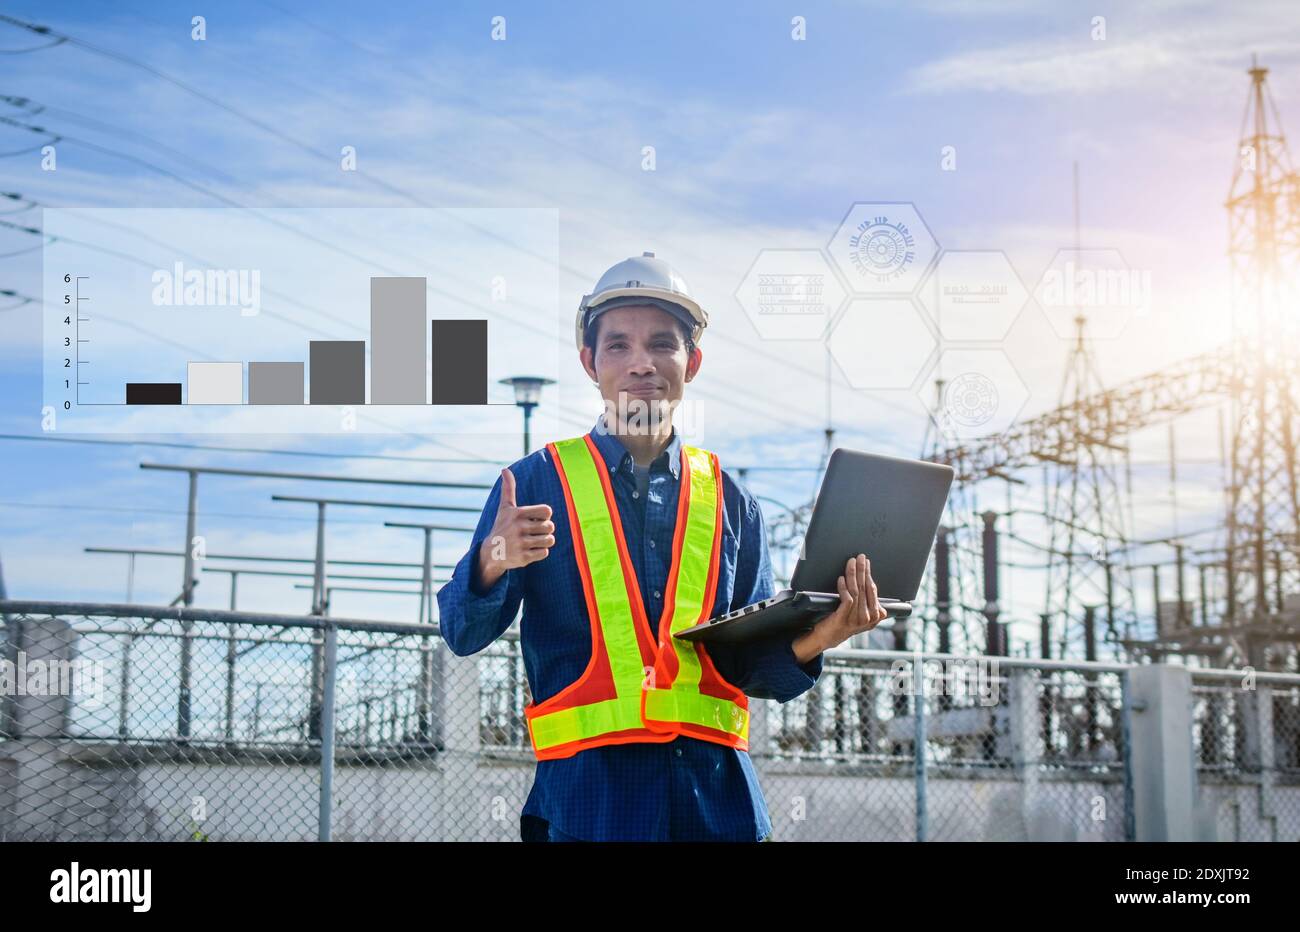 Electric Engineer Holding Computer notebook factory power plant system background Stock Photo